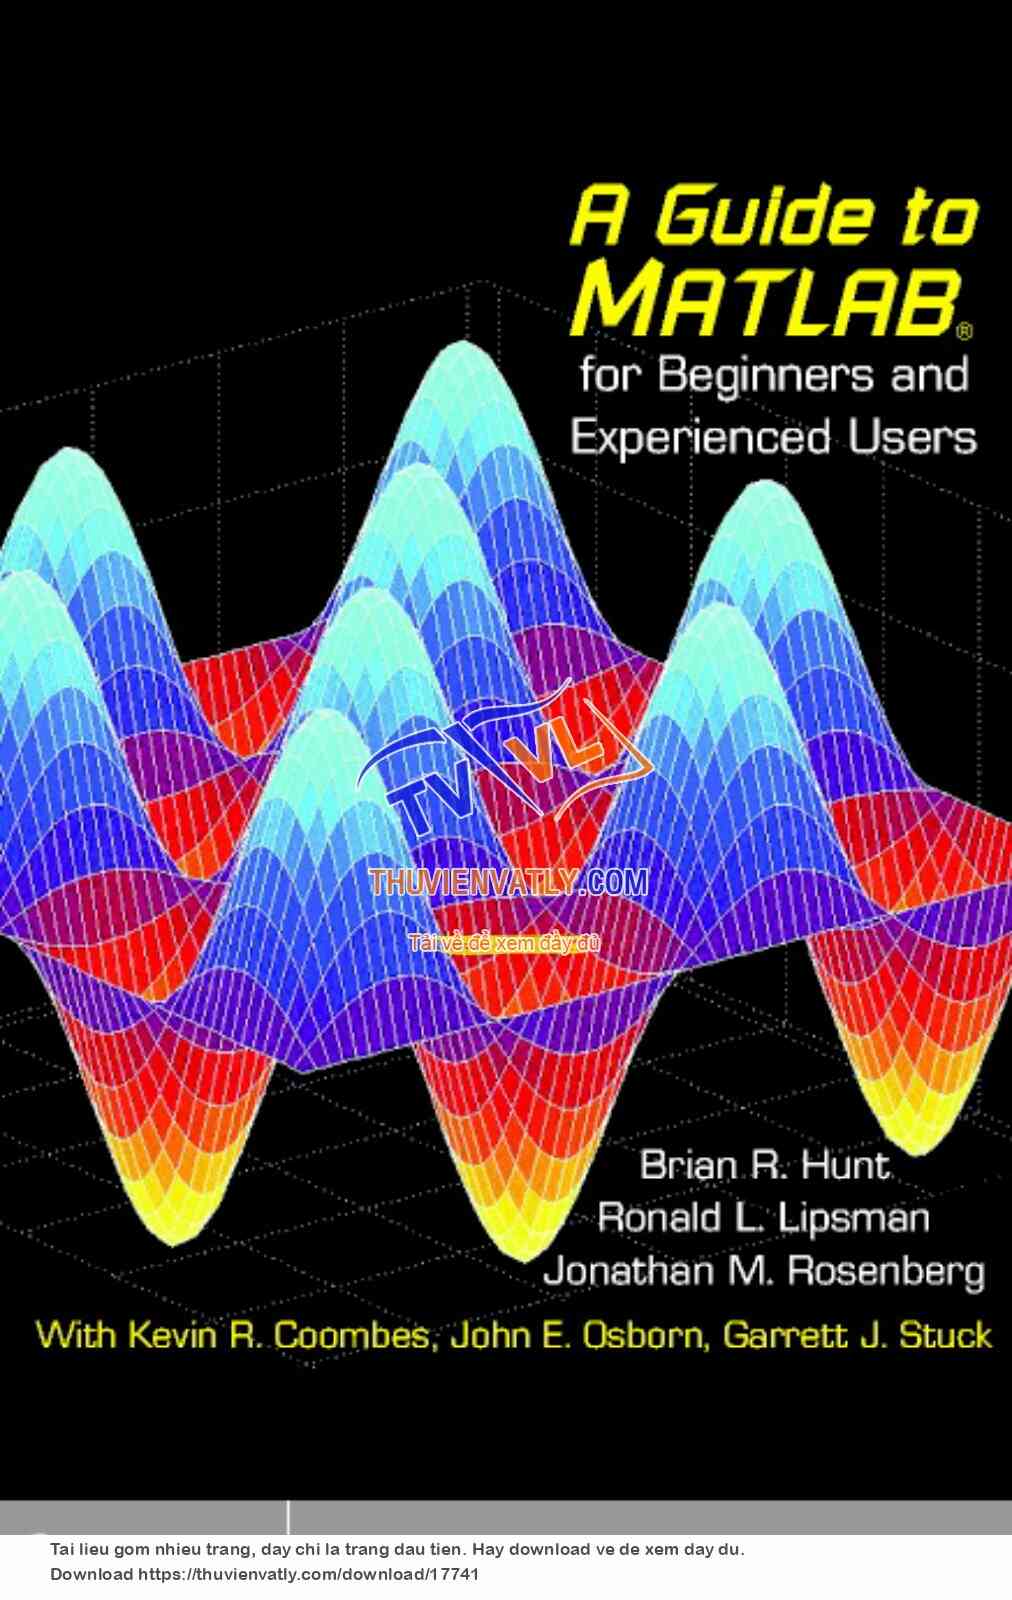 A Guide to MATLAB for Beginners and Experienced Users - Hunt Lipsman & Rosenberg.pdf